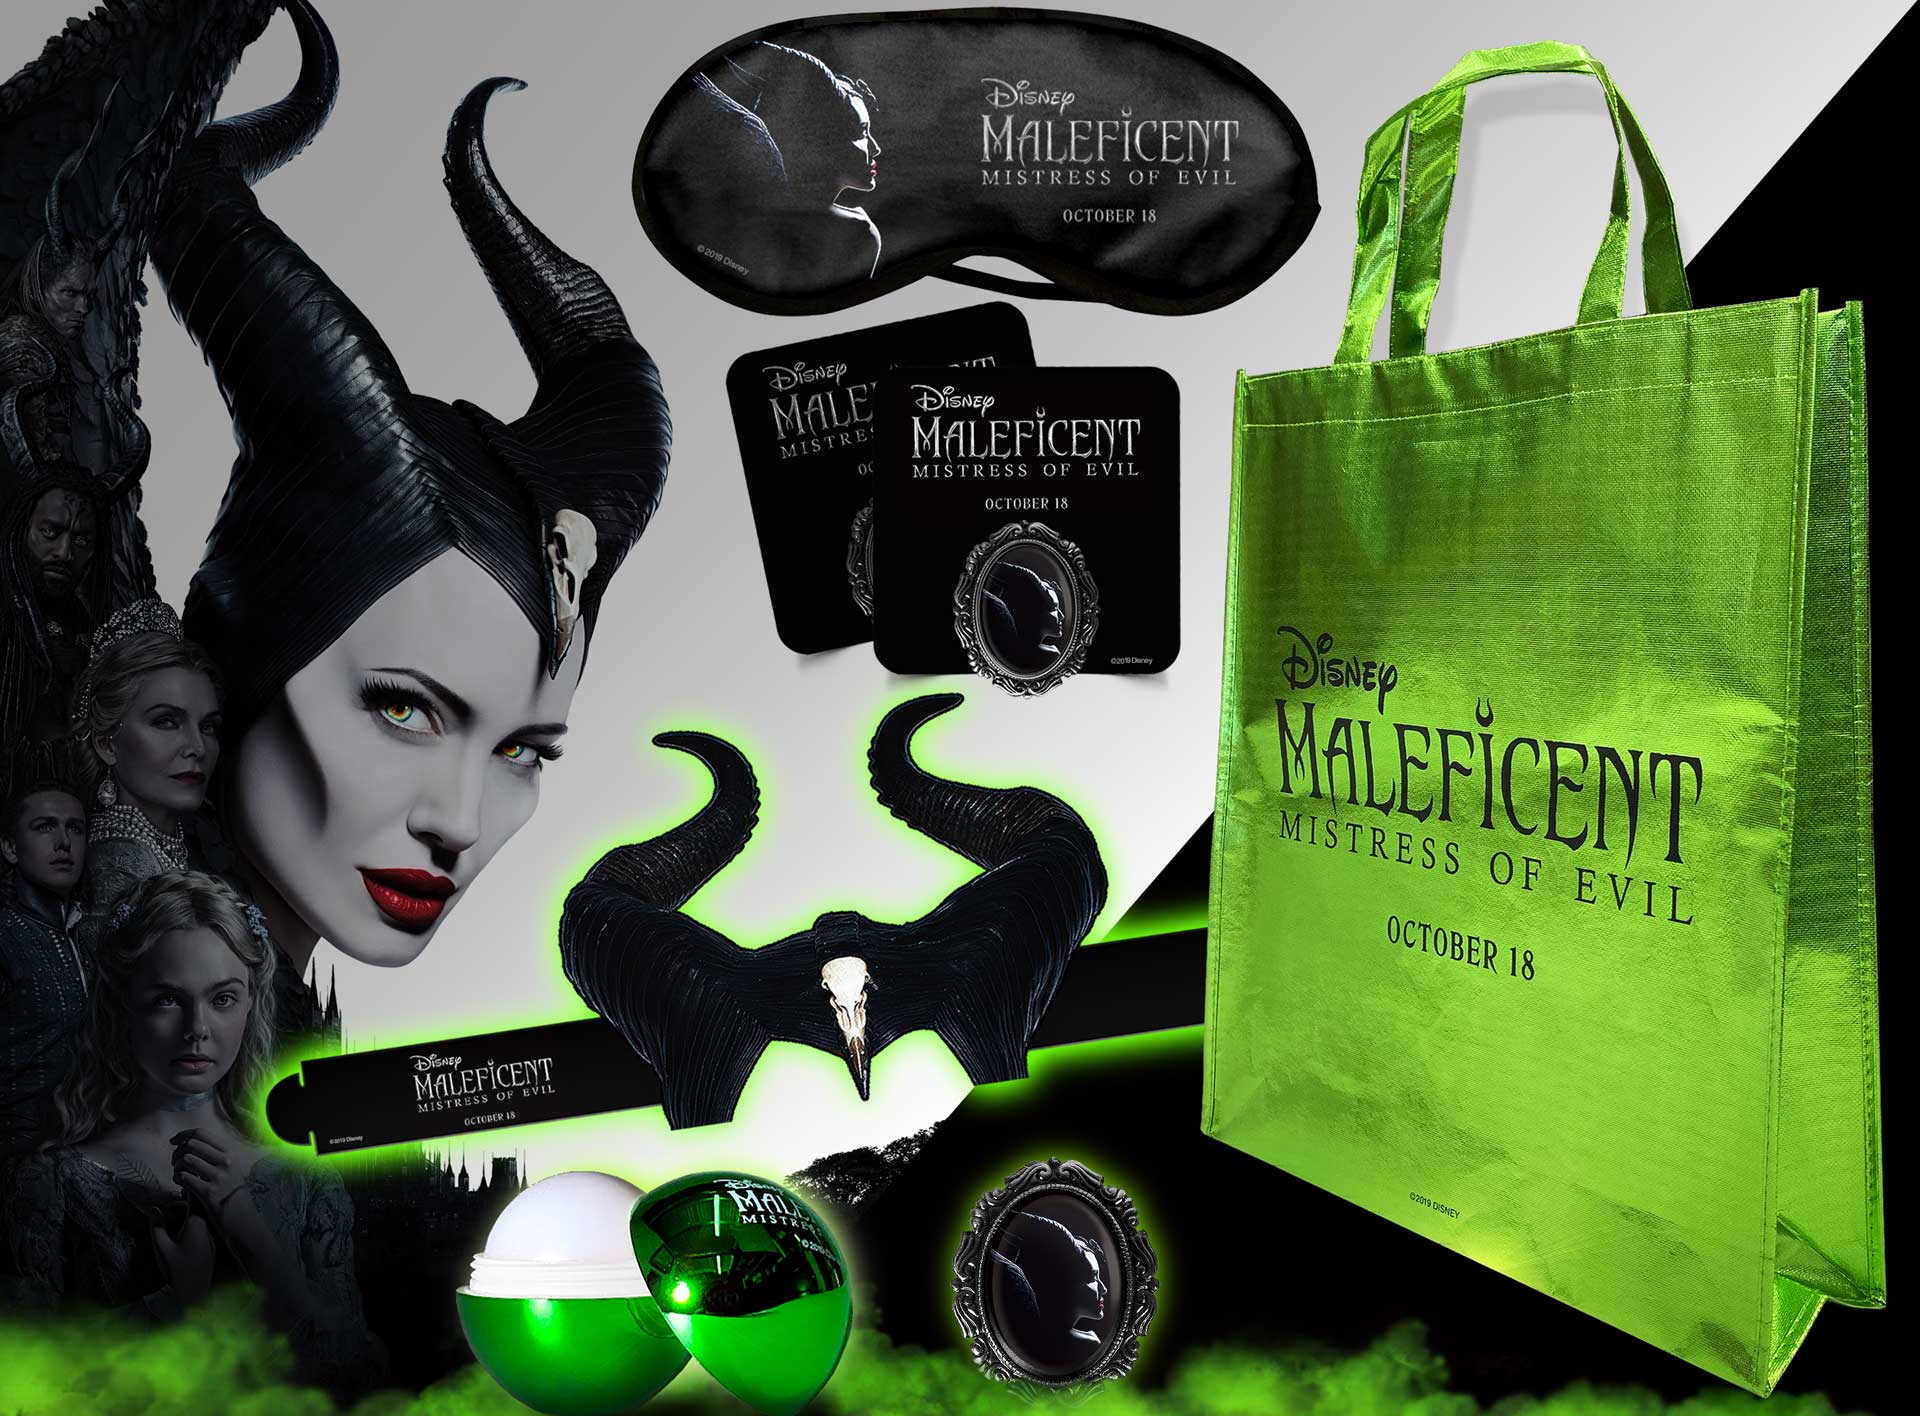 NWG full color tote bag, sleeping face mask, horn head band, lip balm, film premiere pin